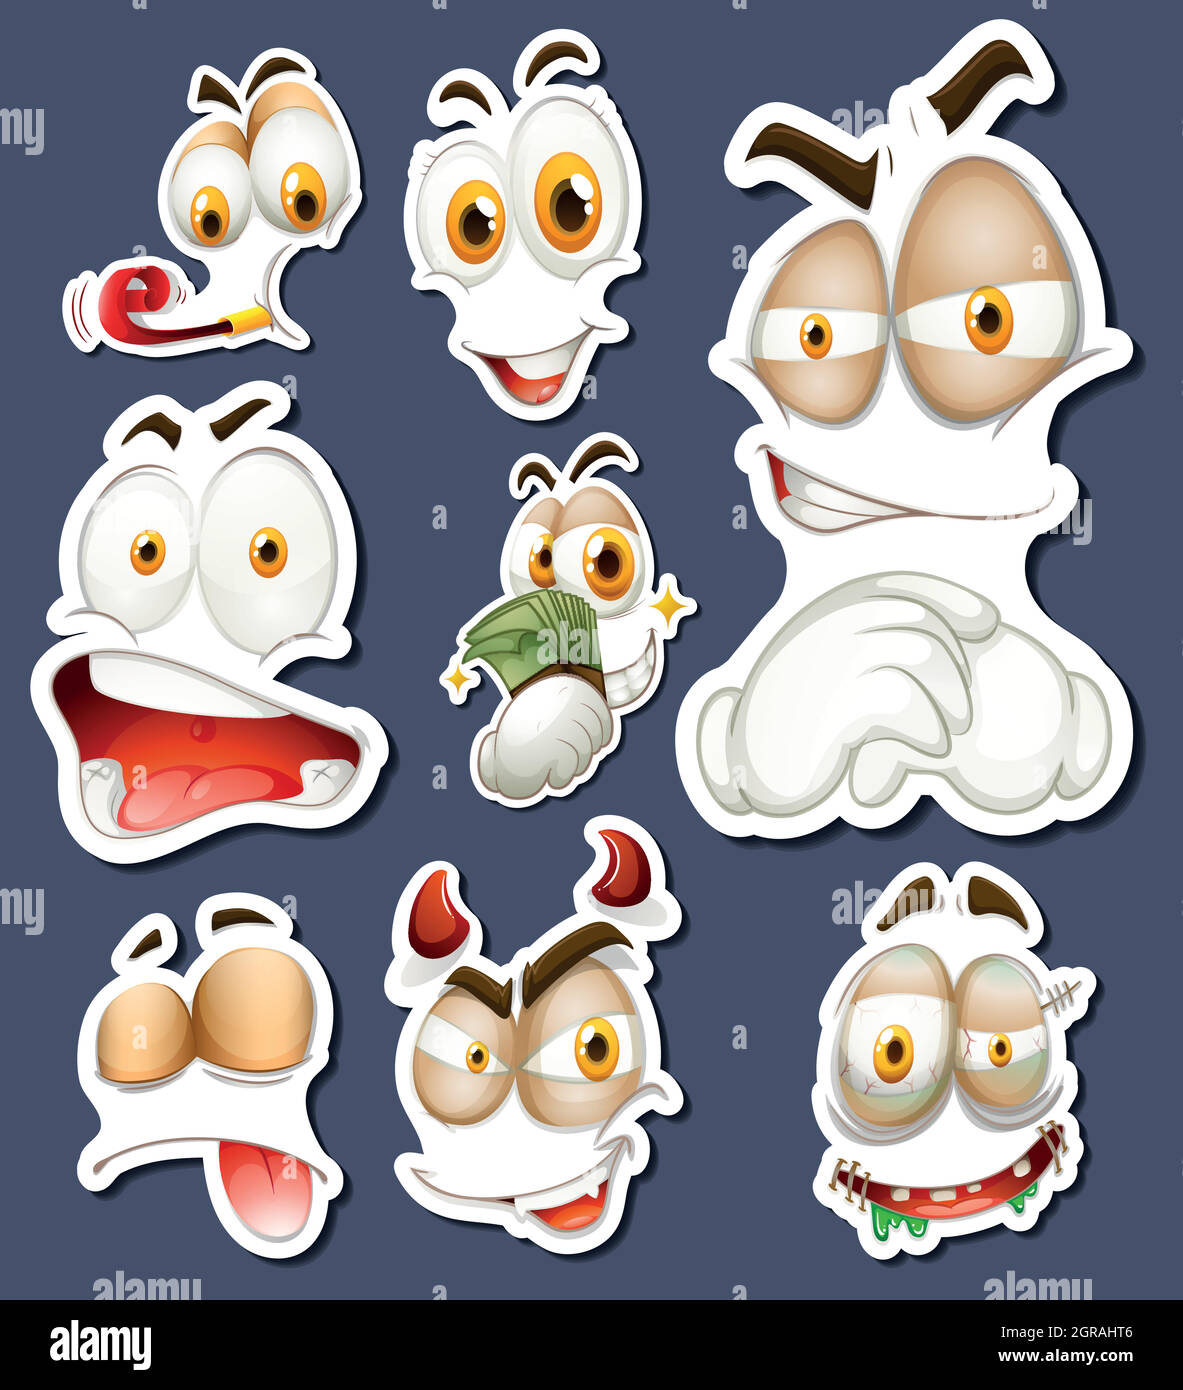 Sticker set with different facial expressions Stock Vector